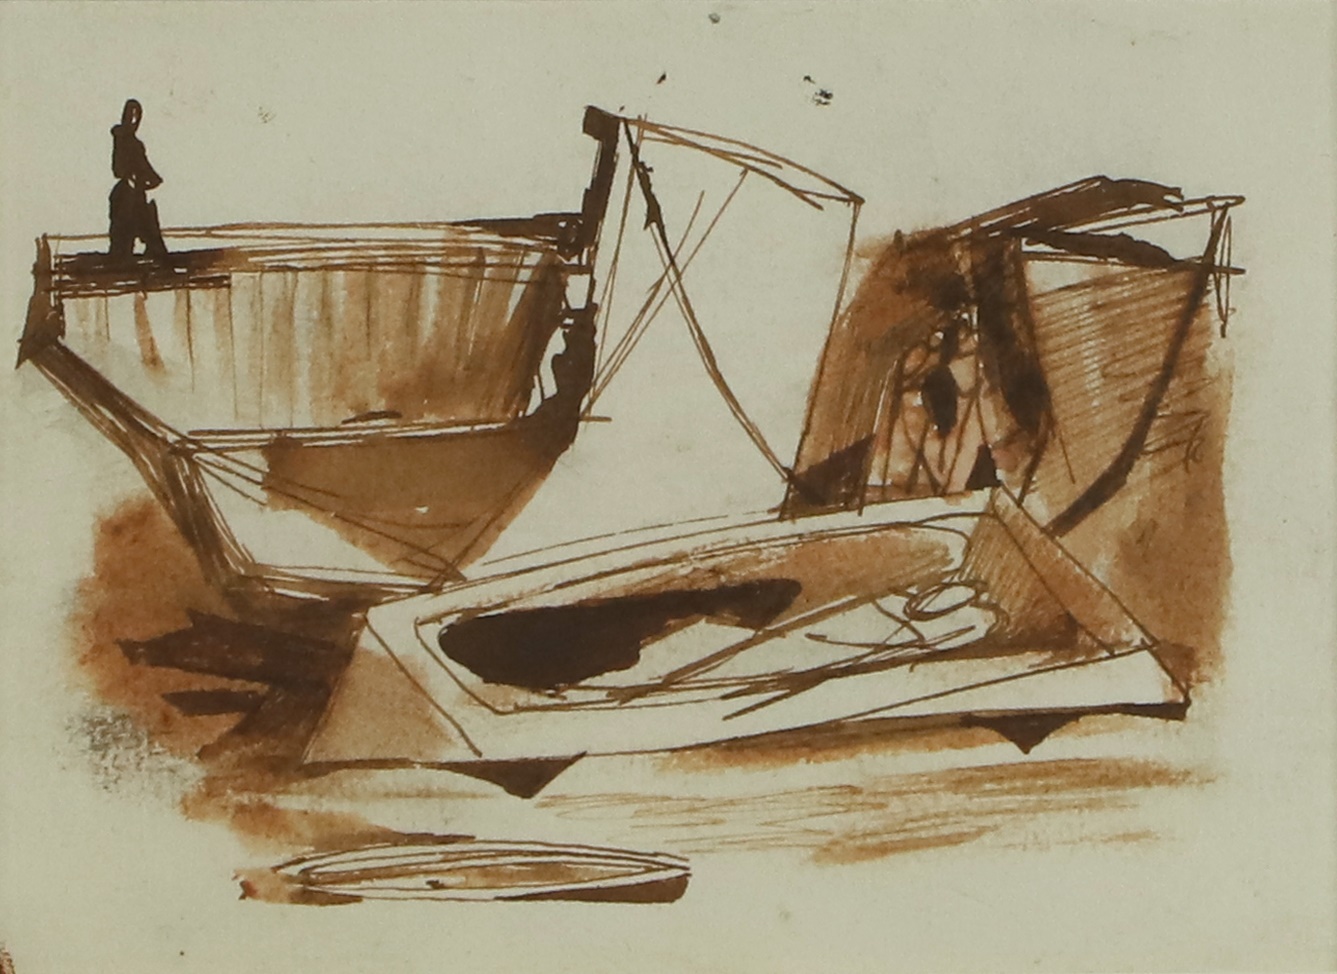 Prunella Clough (1919-1999) Figure and boats, c.1950 verso a farmyard sketch, pen and brown ink 11 x 13.5cm (£600-800)